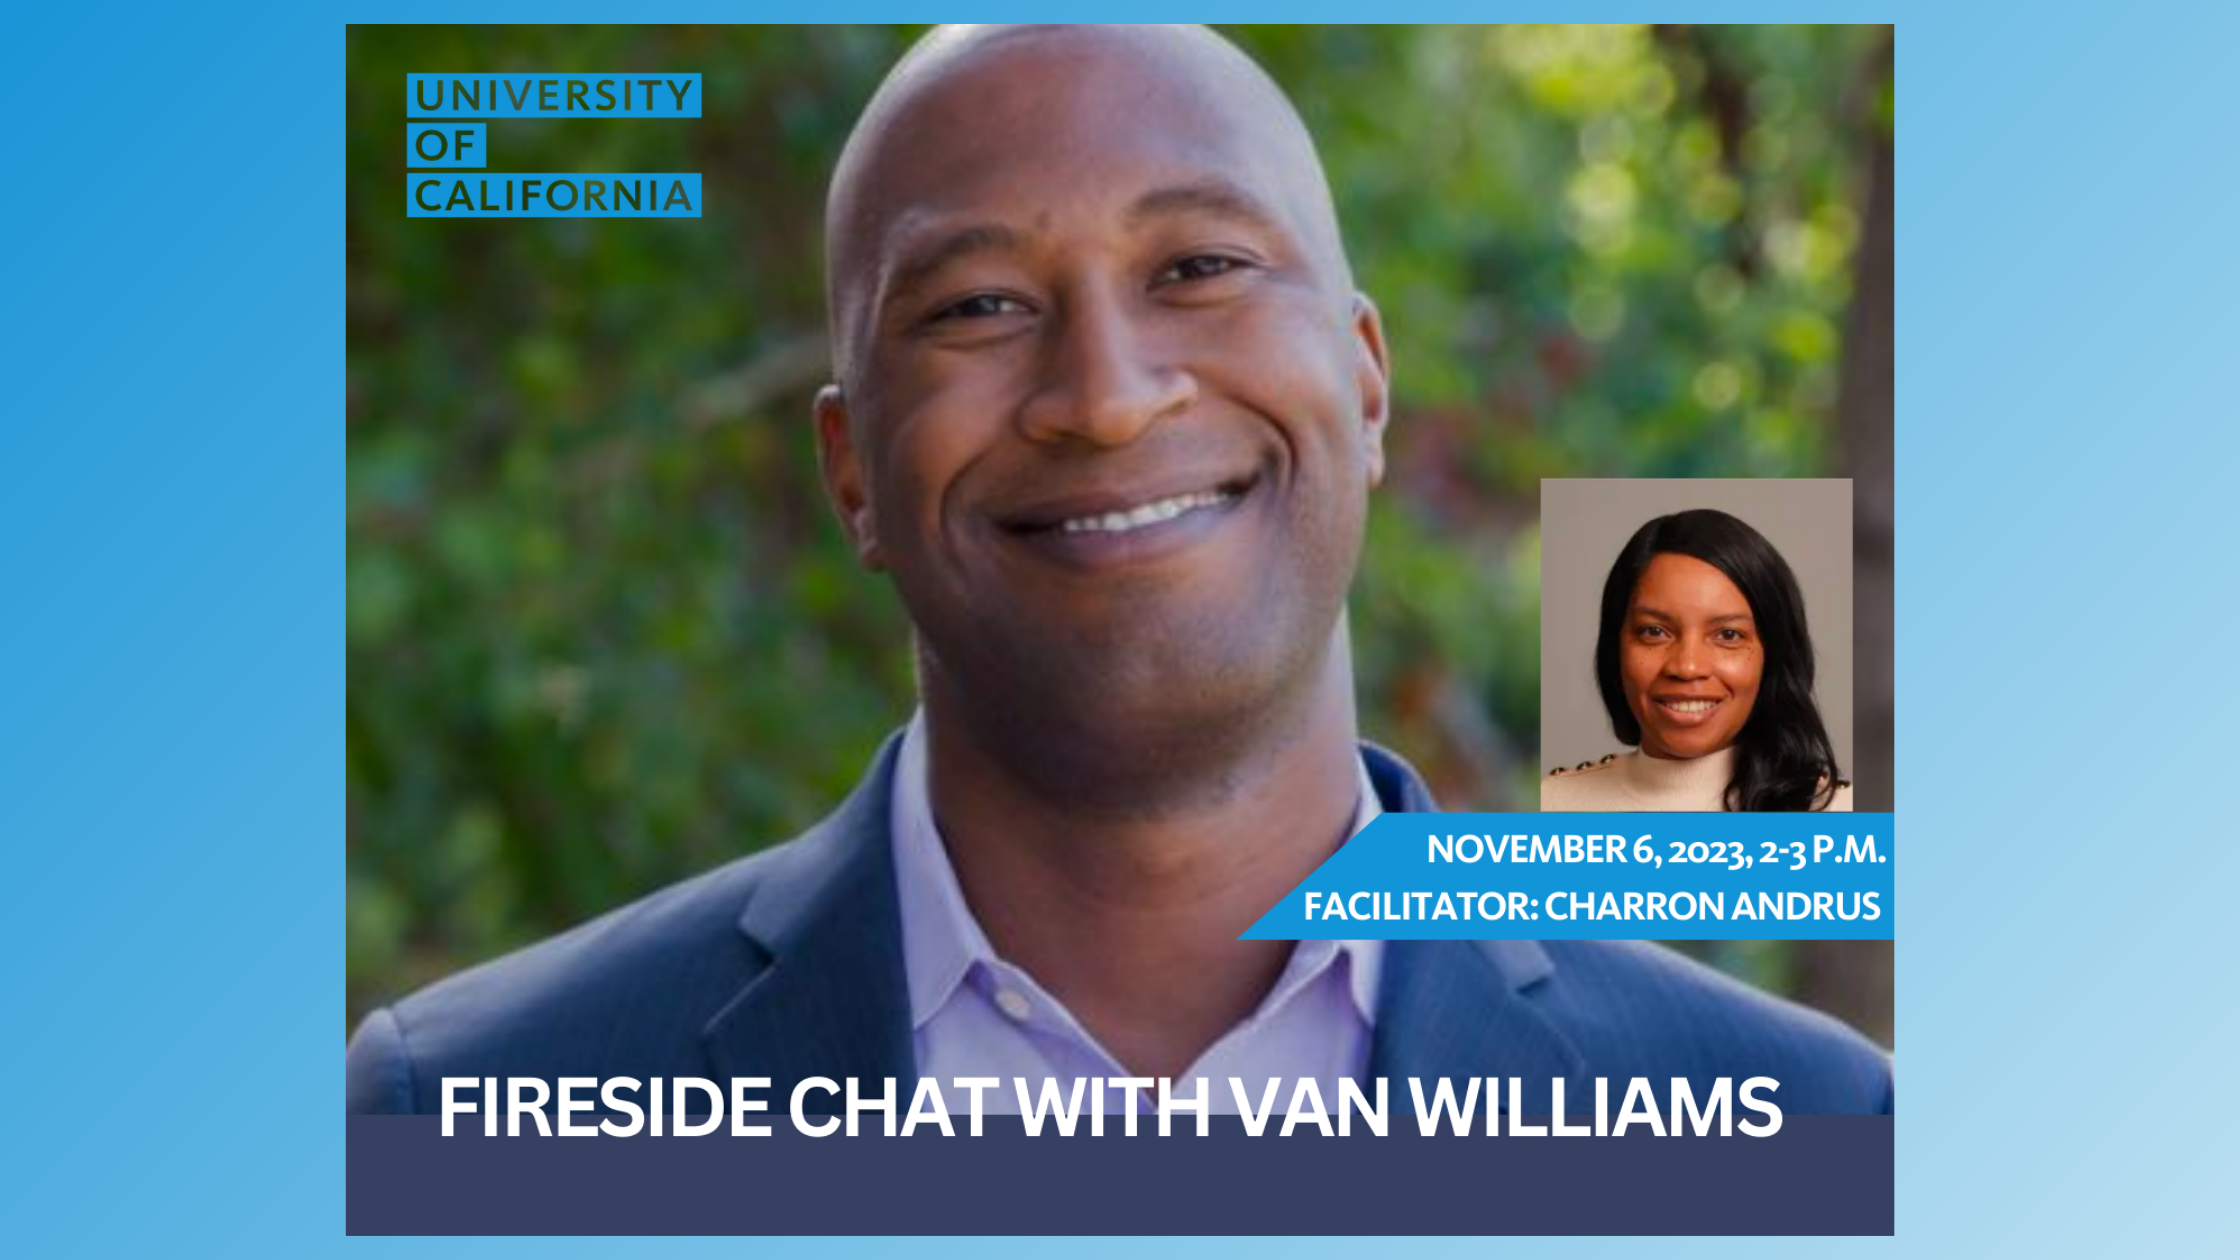 Fireside chat with Van Williams